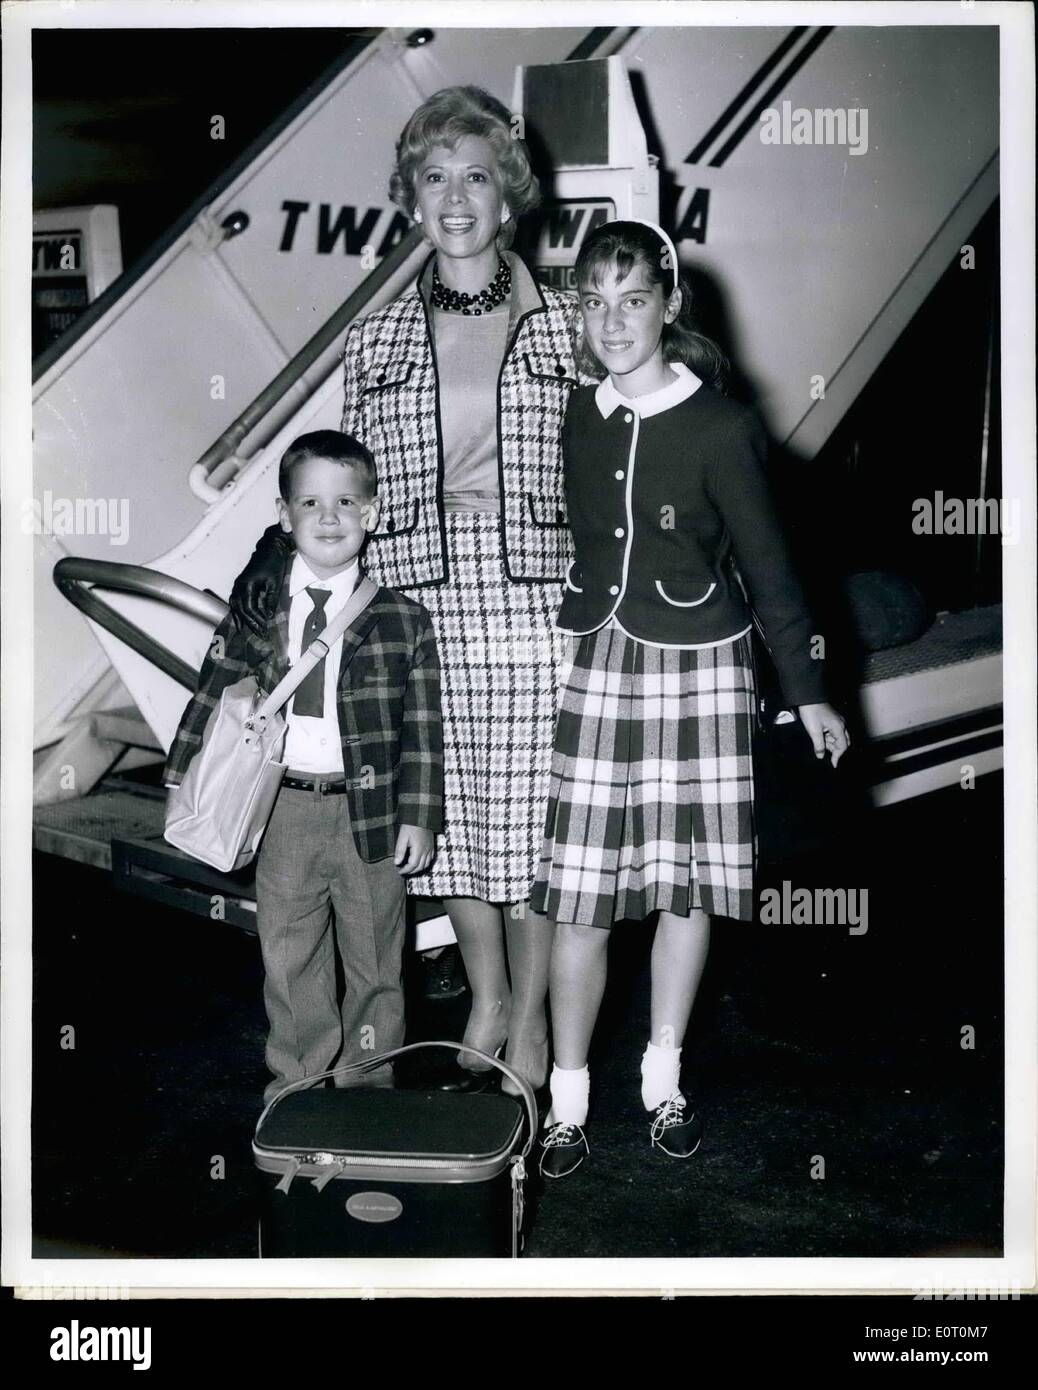 Jun. 06, 1960 - N.Y. International Airport: Popular songbird Dinah Shore is pictured on Arrival with her children, Milisa (on her left) and her son Jody from Los Angeles Via TWA's intercontinental superjet. Mrs. George Montgomery in real life and the children will be away for two weeks in Copenhagen where she will shoot TV films for her Chevy Show. Stock Photo